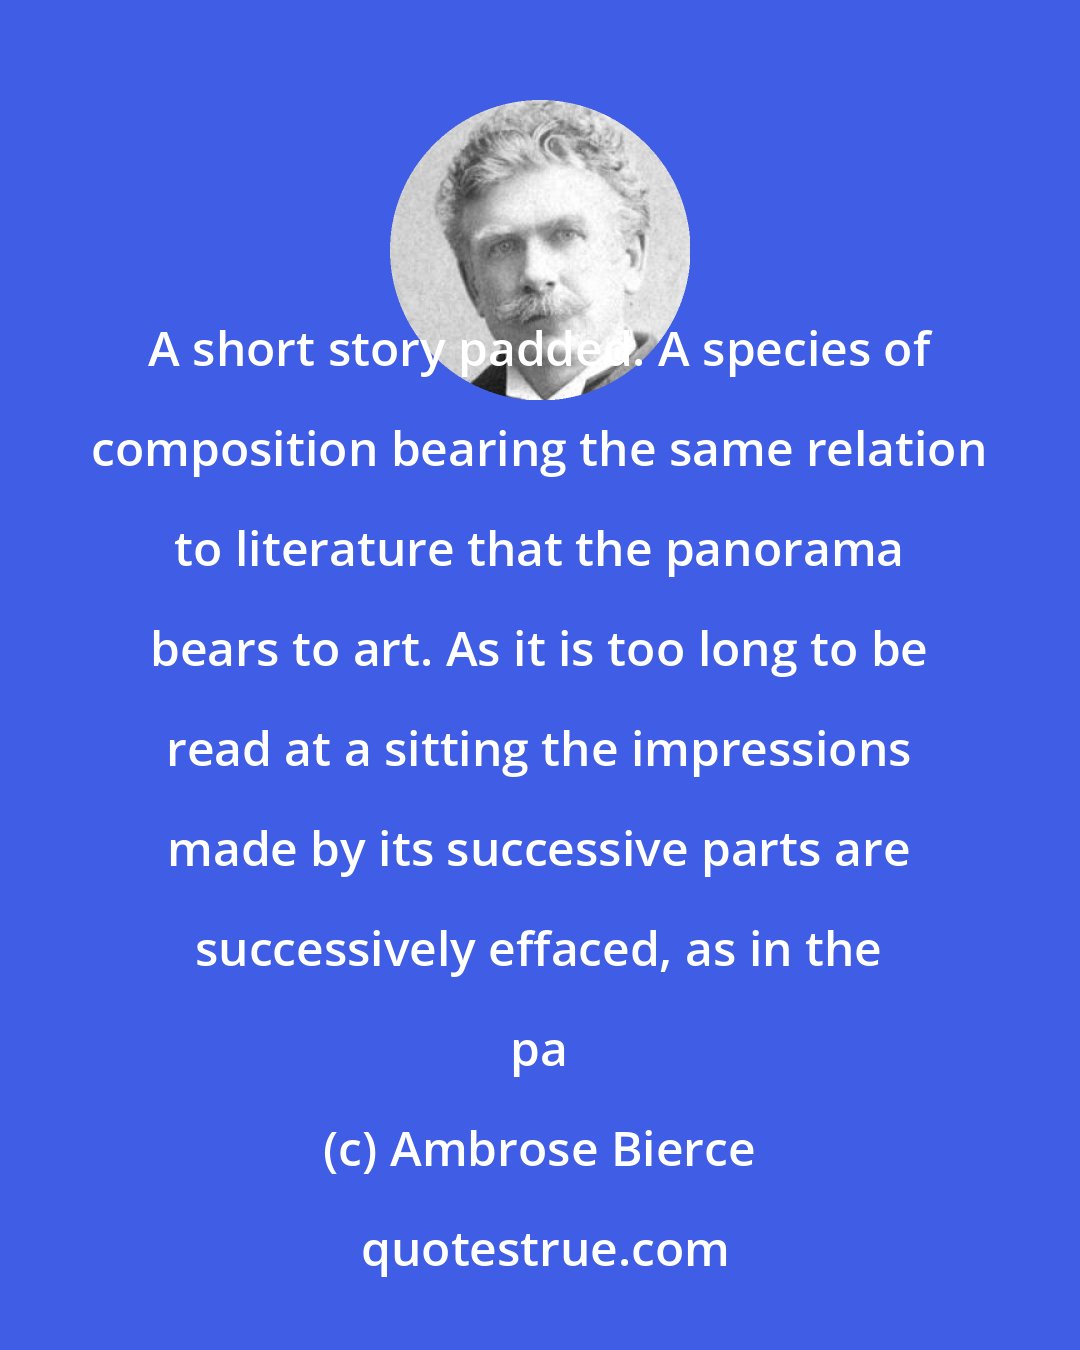 Ambrose Bierce: A short story padded. A species of composition bearing the same relation to literature that the panorama bears to art. As it is too long to be read at a sitting the impressions made by its successive parts are successively effaced, as in the pa